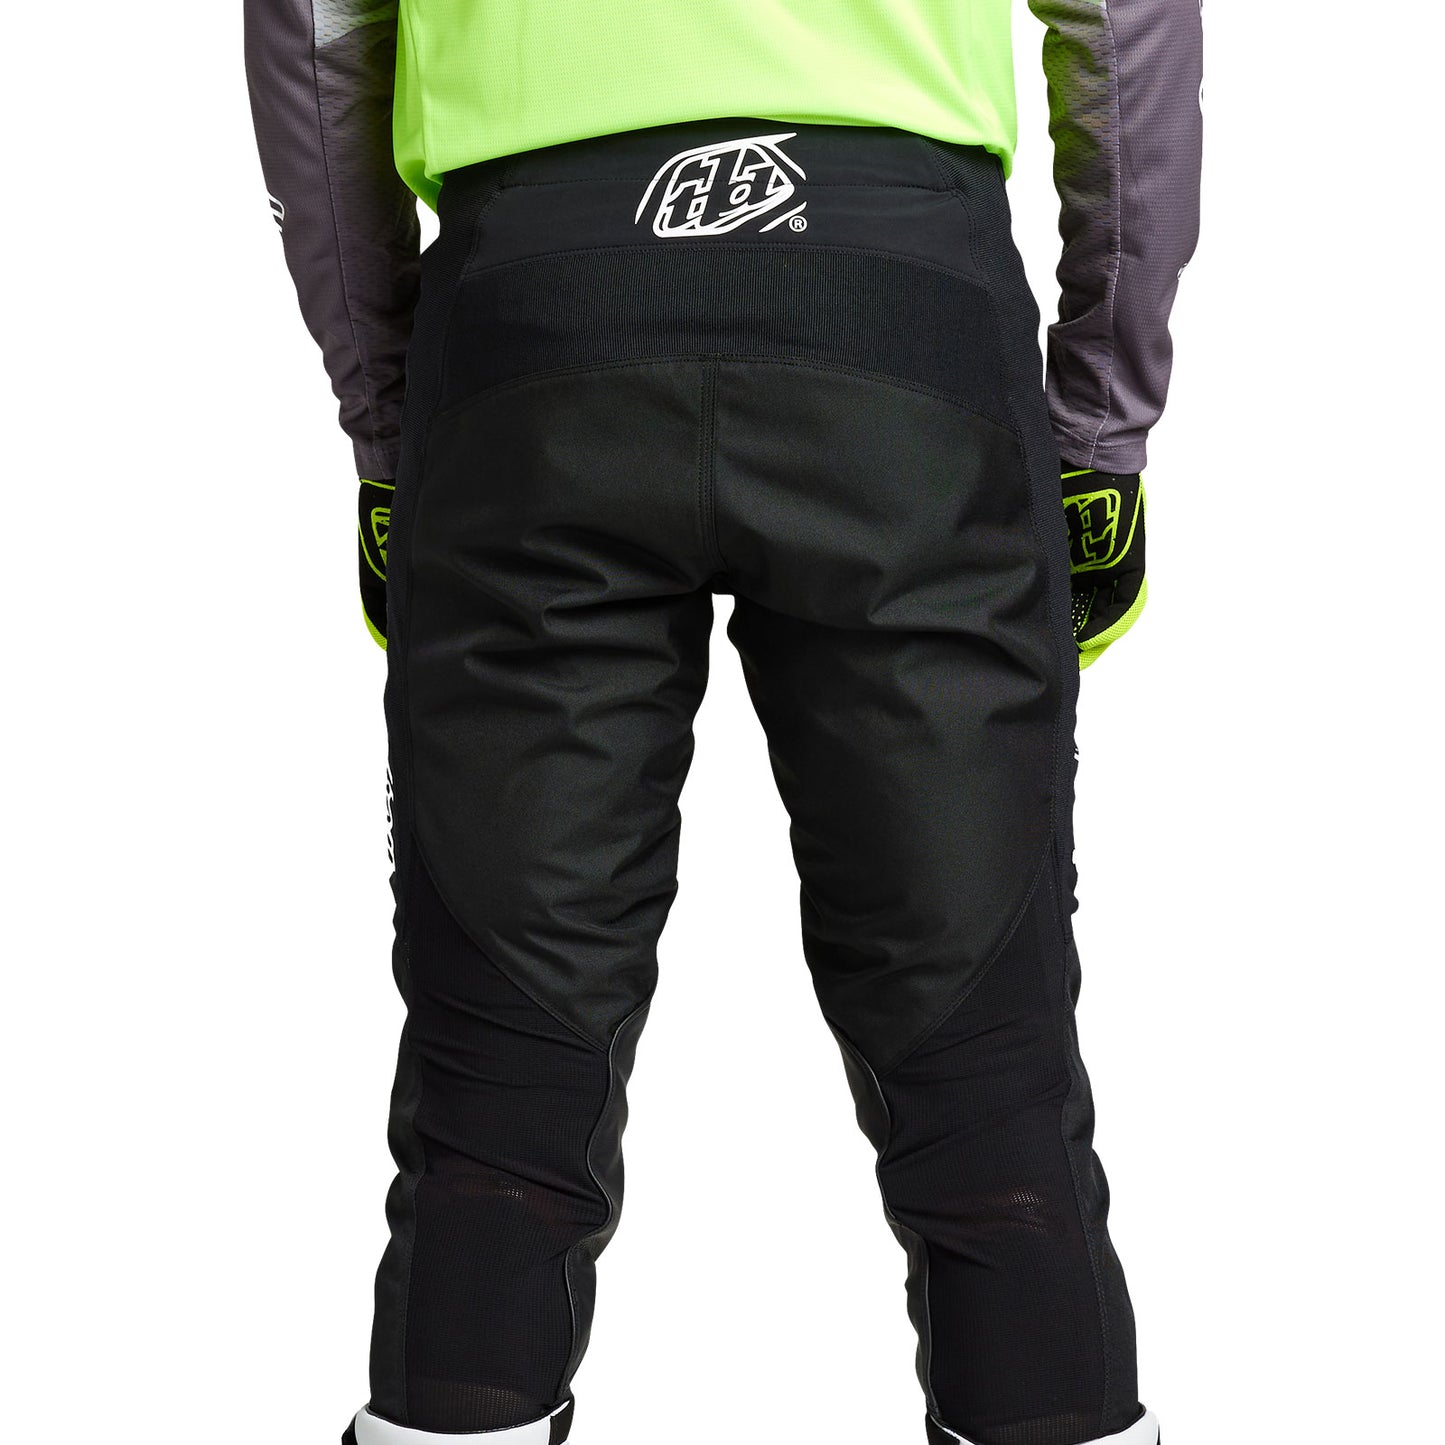 Bike pants TLD GP MONO with comfy fit and stretch fabric for kids